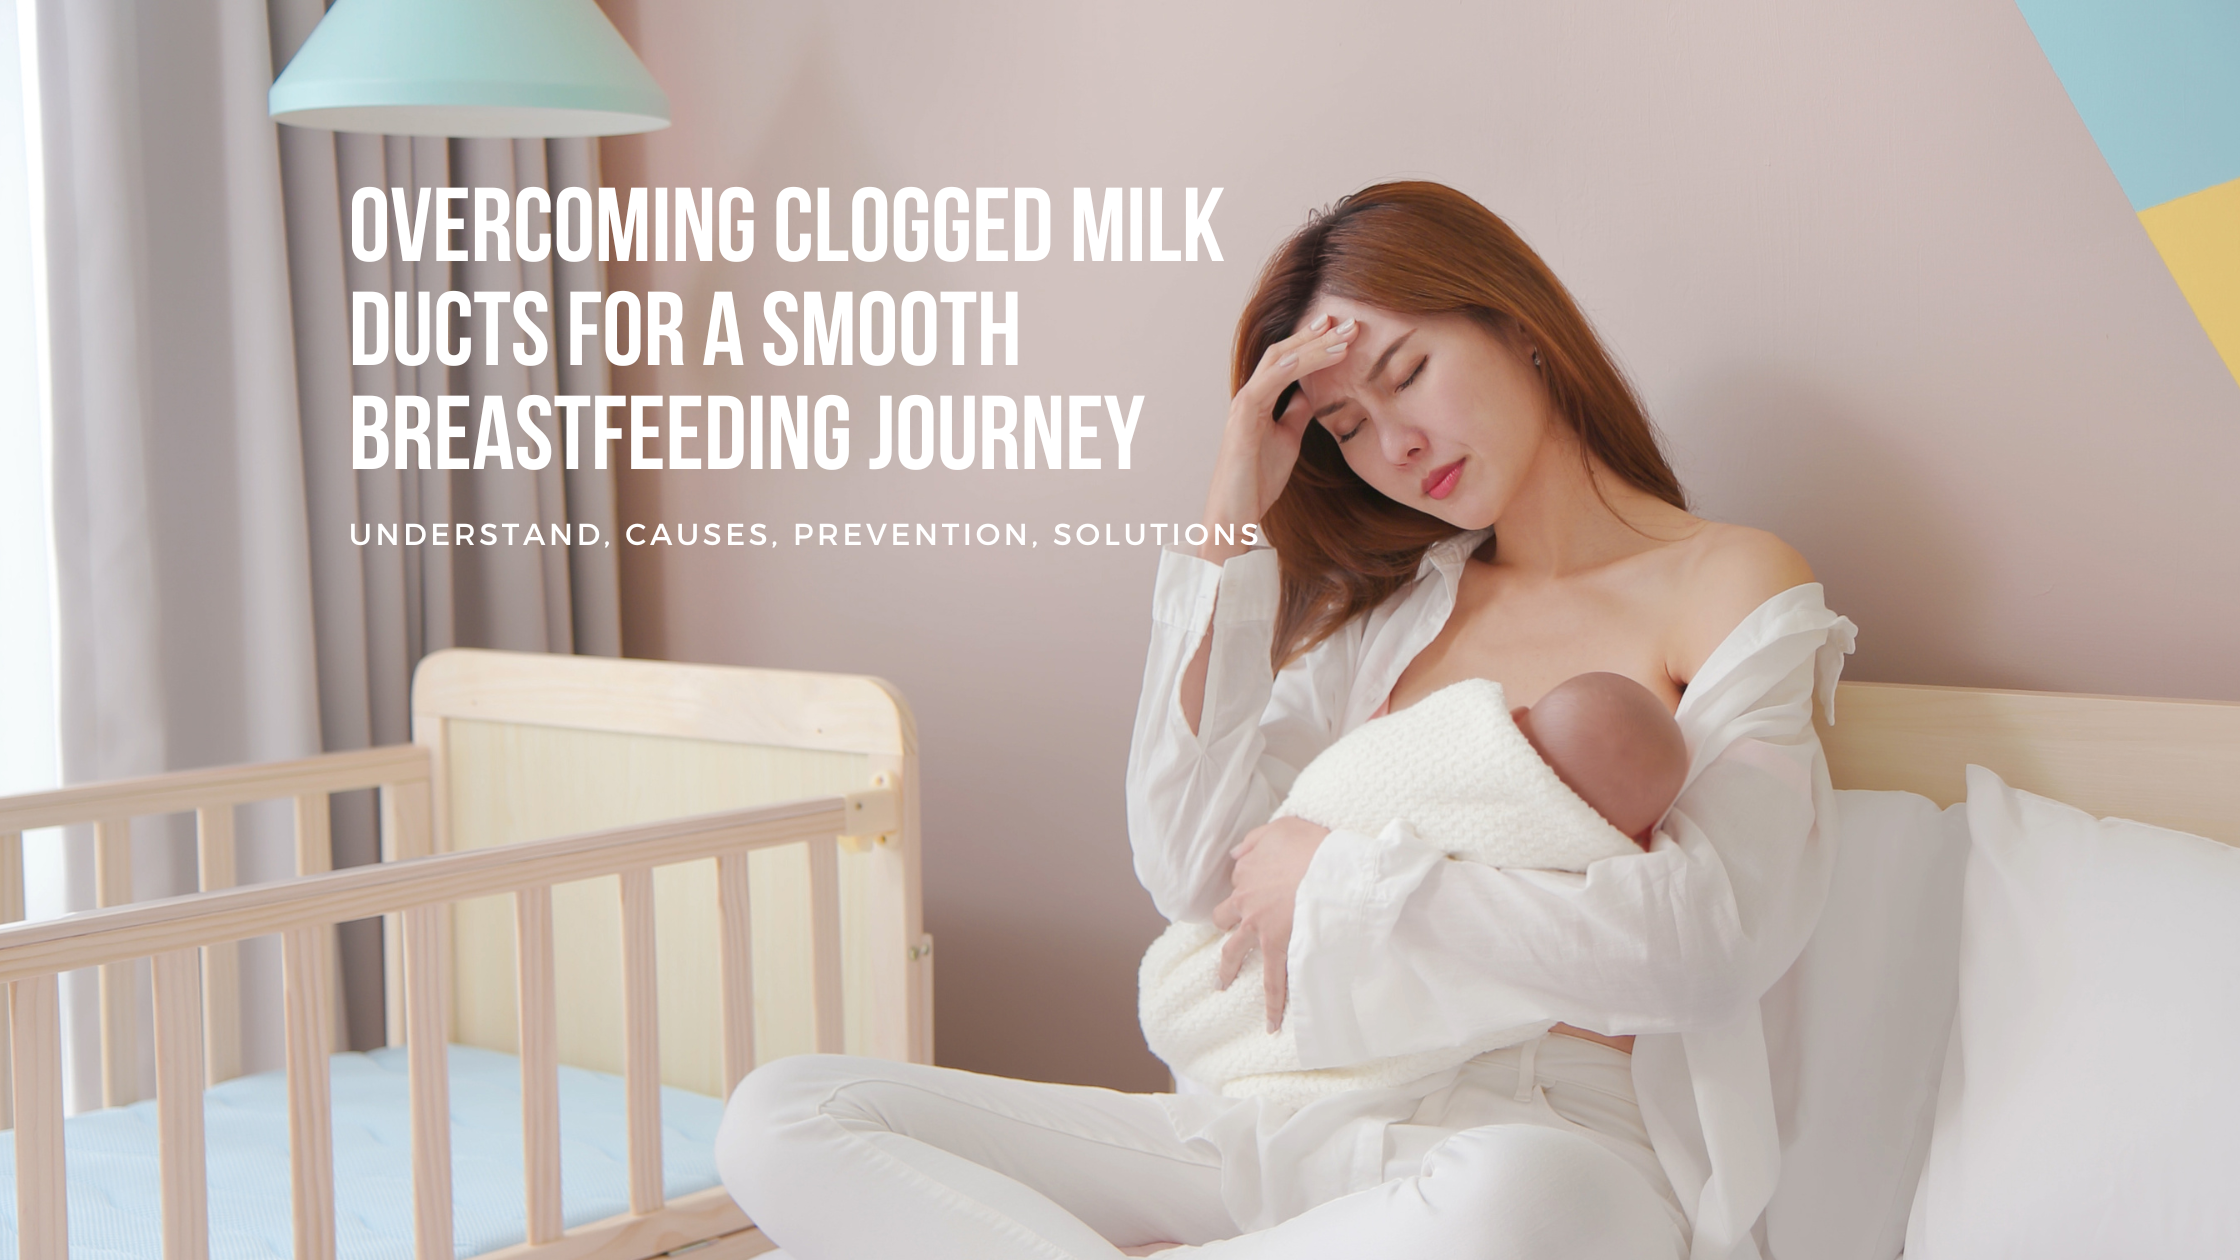 Overcoming Clogged Milk Ducts for a Smooth Breastfeeding Journey